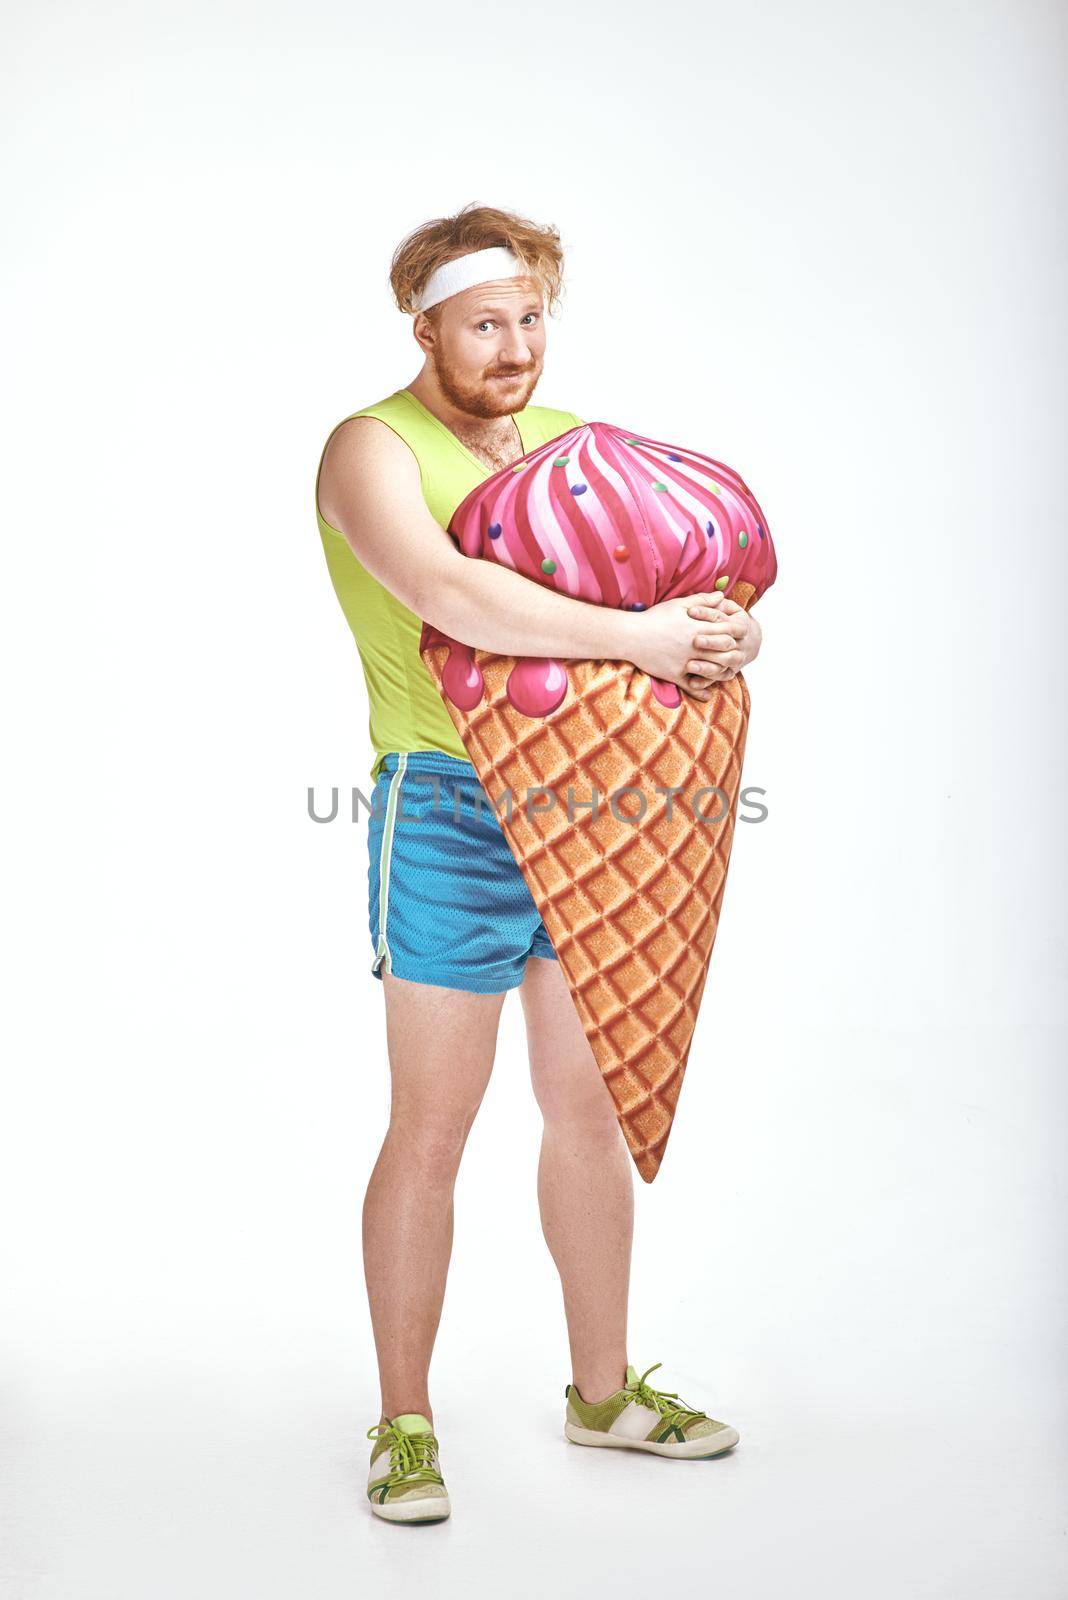 Red haired, bearded, plump man is holding a big ice cream by friendsstock